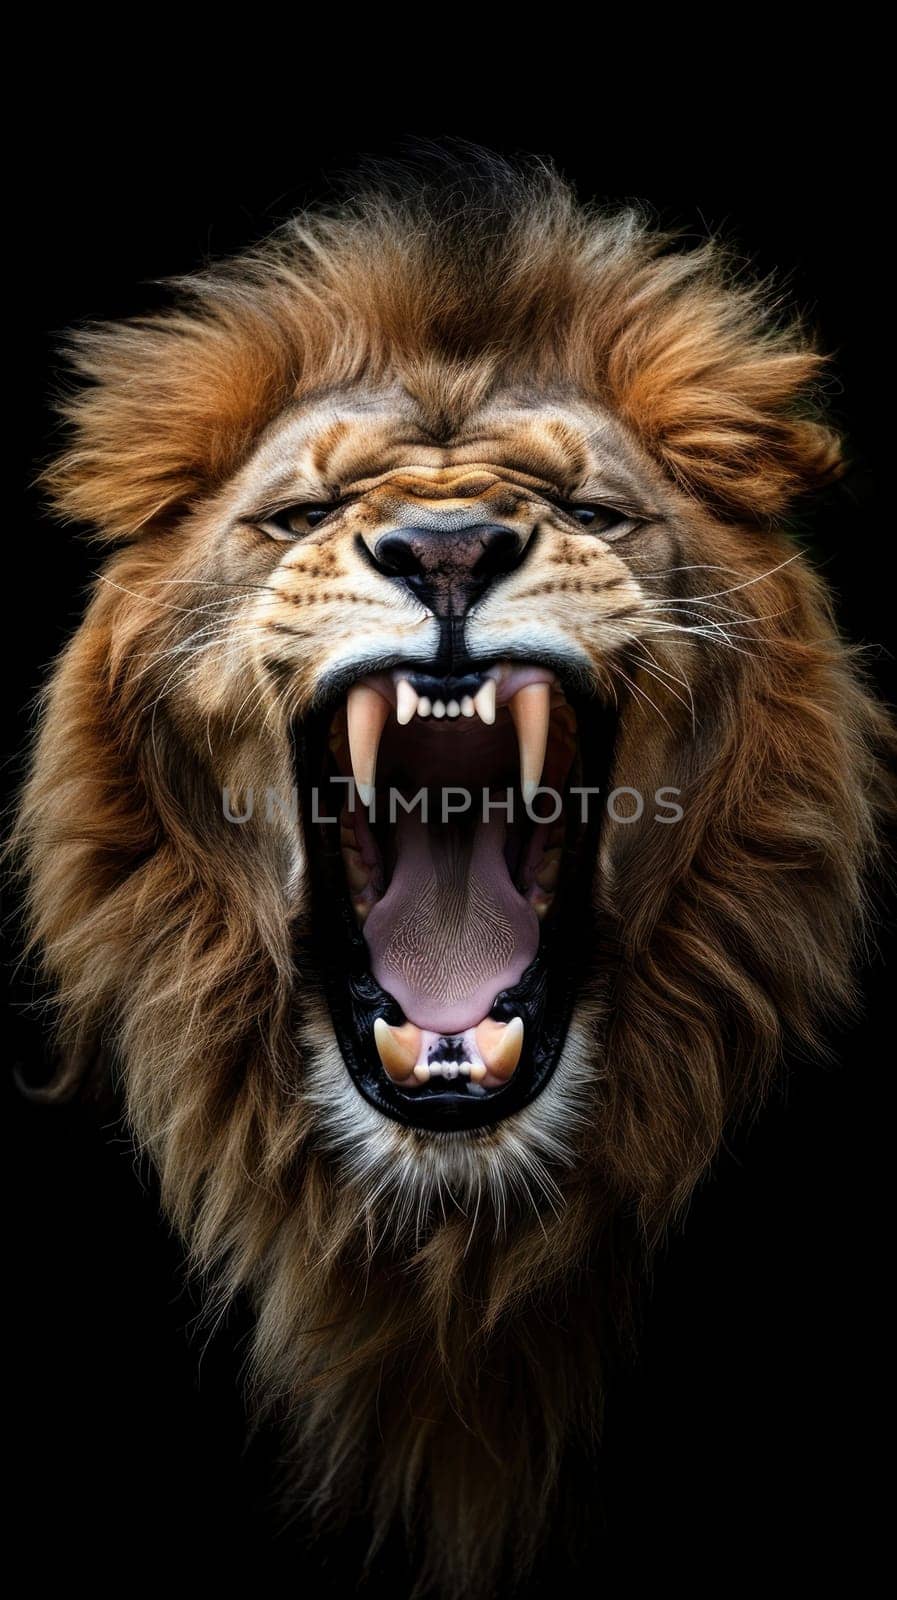 A lion with its mouth open and teeth bared by golfmerrymaker